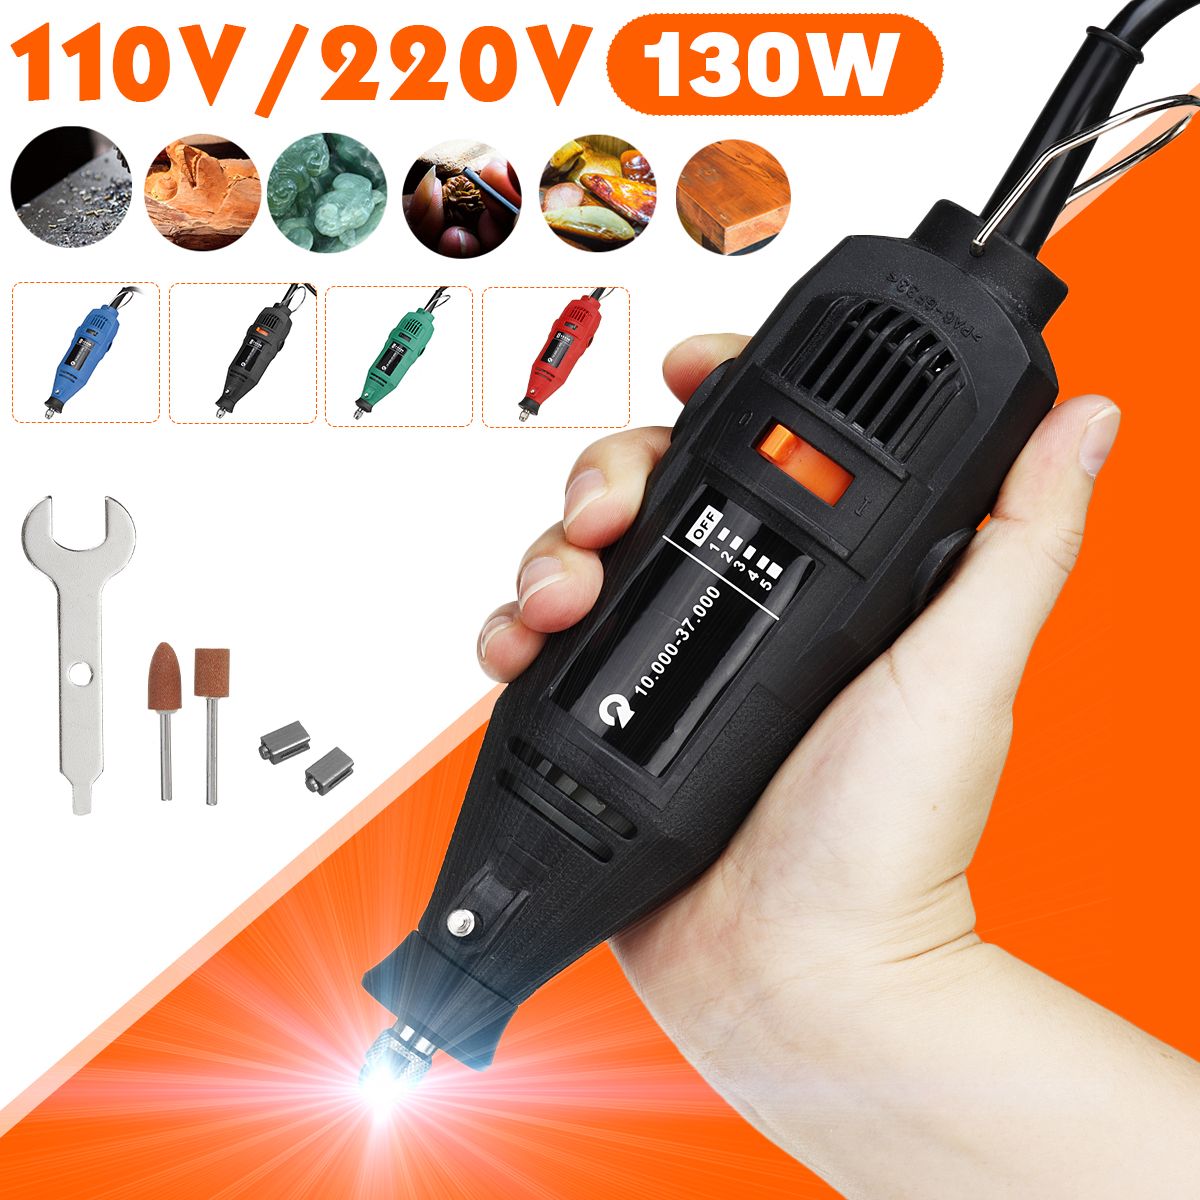 130W-Mini-Corded-Electric-Grinder-Rotary-Tools-Kit--Portable-Drill-Milling-Engraved--Polishing-Sand--1728463